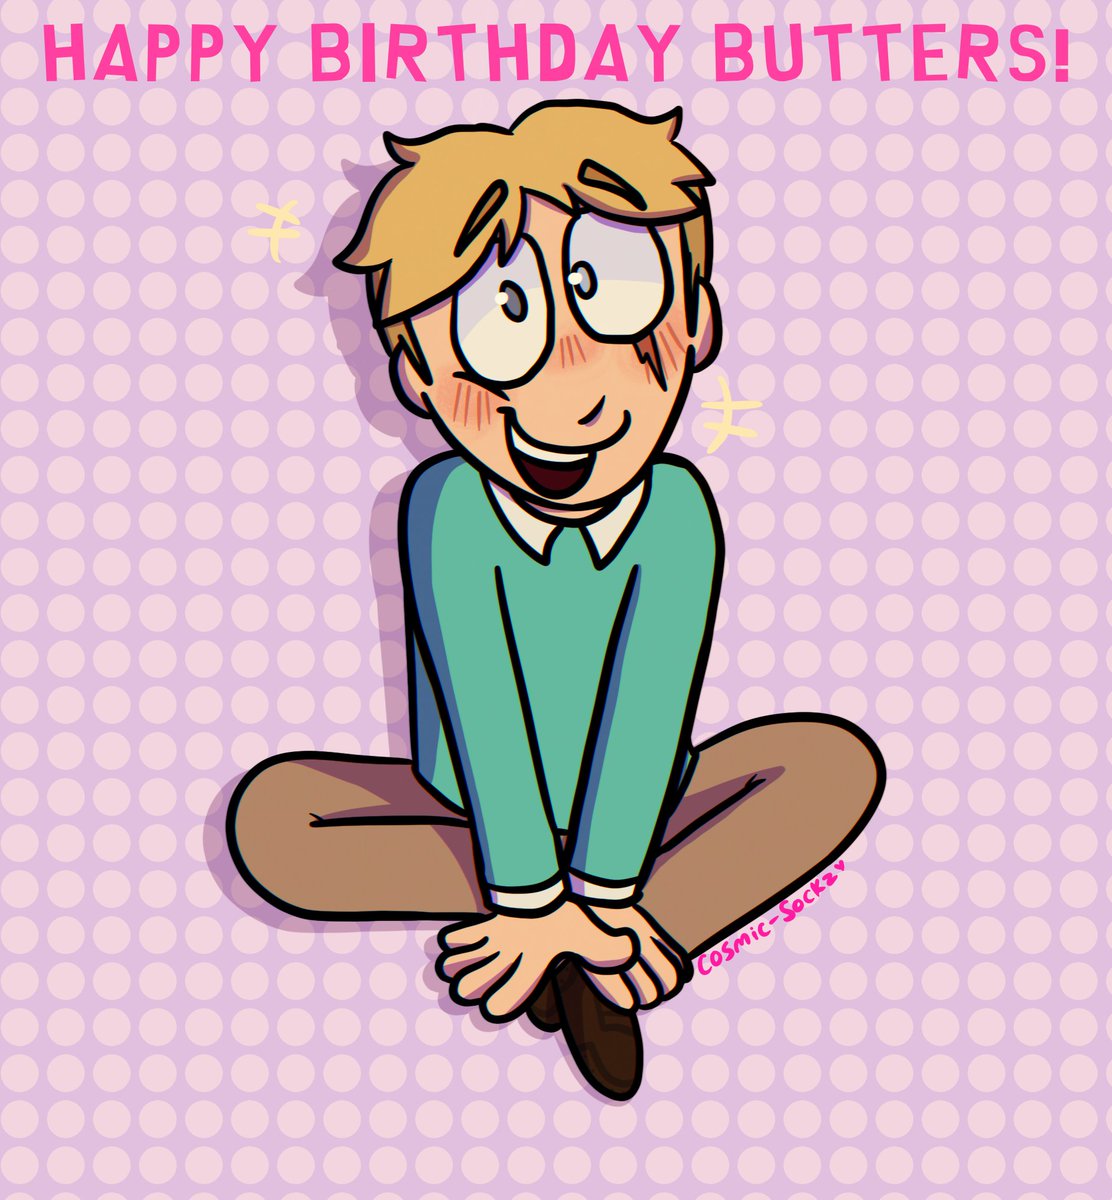 Happy birthday butters!! [ #SouthPark #spbutters ]